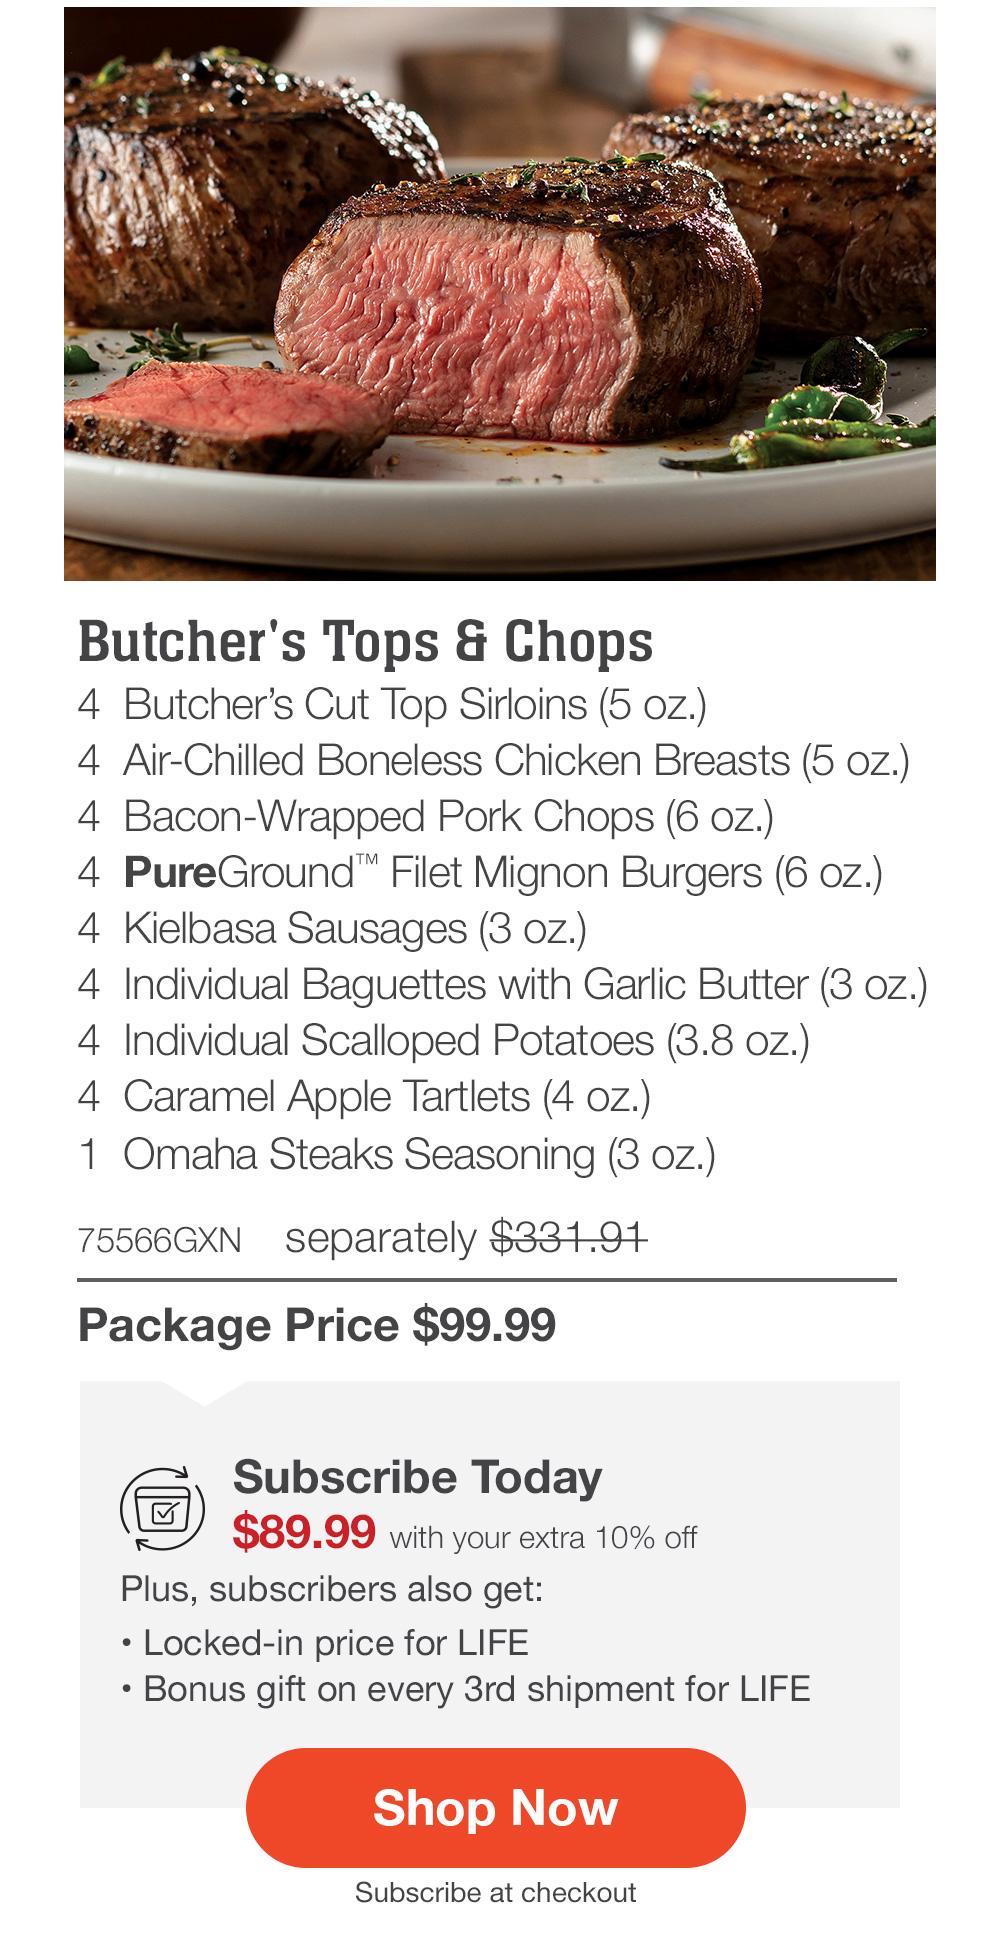 Butcher's Tops & Chops - 4 Butcher's Cut Top Sirloins (5 oz.) - 4 Air-Chilled Boneless Chicken Breasts (5 oz.) - 4 Bacon-Wrapped Pork Chops (6 oz.) - 4 PureGround™ Filet Mignon Burgers (6 oz.) - 4 Kielbasa Sausages (3 oz.) - 4 Individual Baguettes with Garlic Butter (3 oz.) - 4 Individual Scalloped Potatoes (3.8 oz.) - 4 Caramel Apple Tartlets (4 oz.) - 1 Omaha Steaks Seasoning (3 oz.) - 75566GXN separately $331.91 | Package Price $99.99 | Subscribe Today - $89.99 with your extra 10% off Plus, subscribers also get: Locked-in price for LIFE | Bonus gift on every 3rd shipment for LIFE || Shop Now || Subscribe at checkout